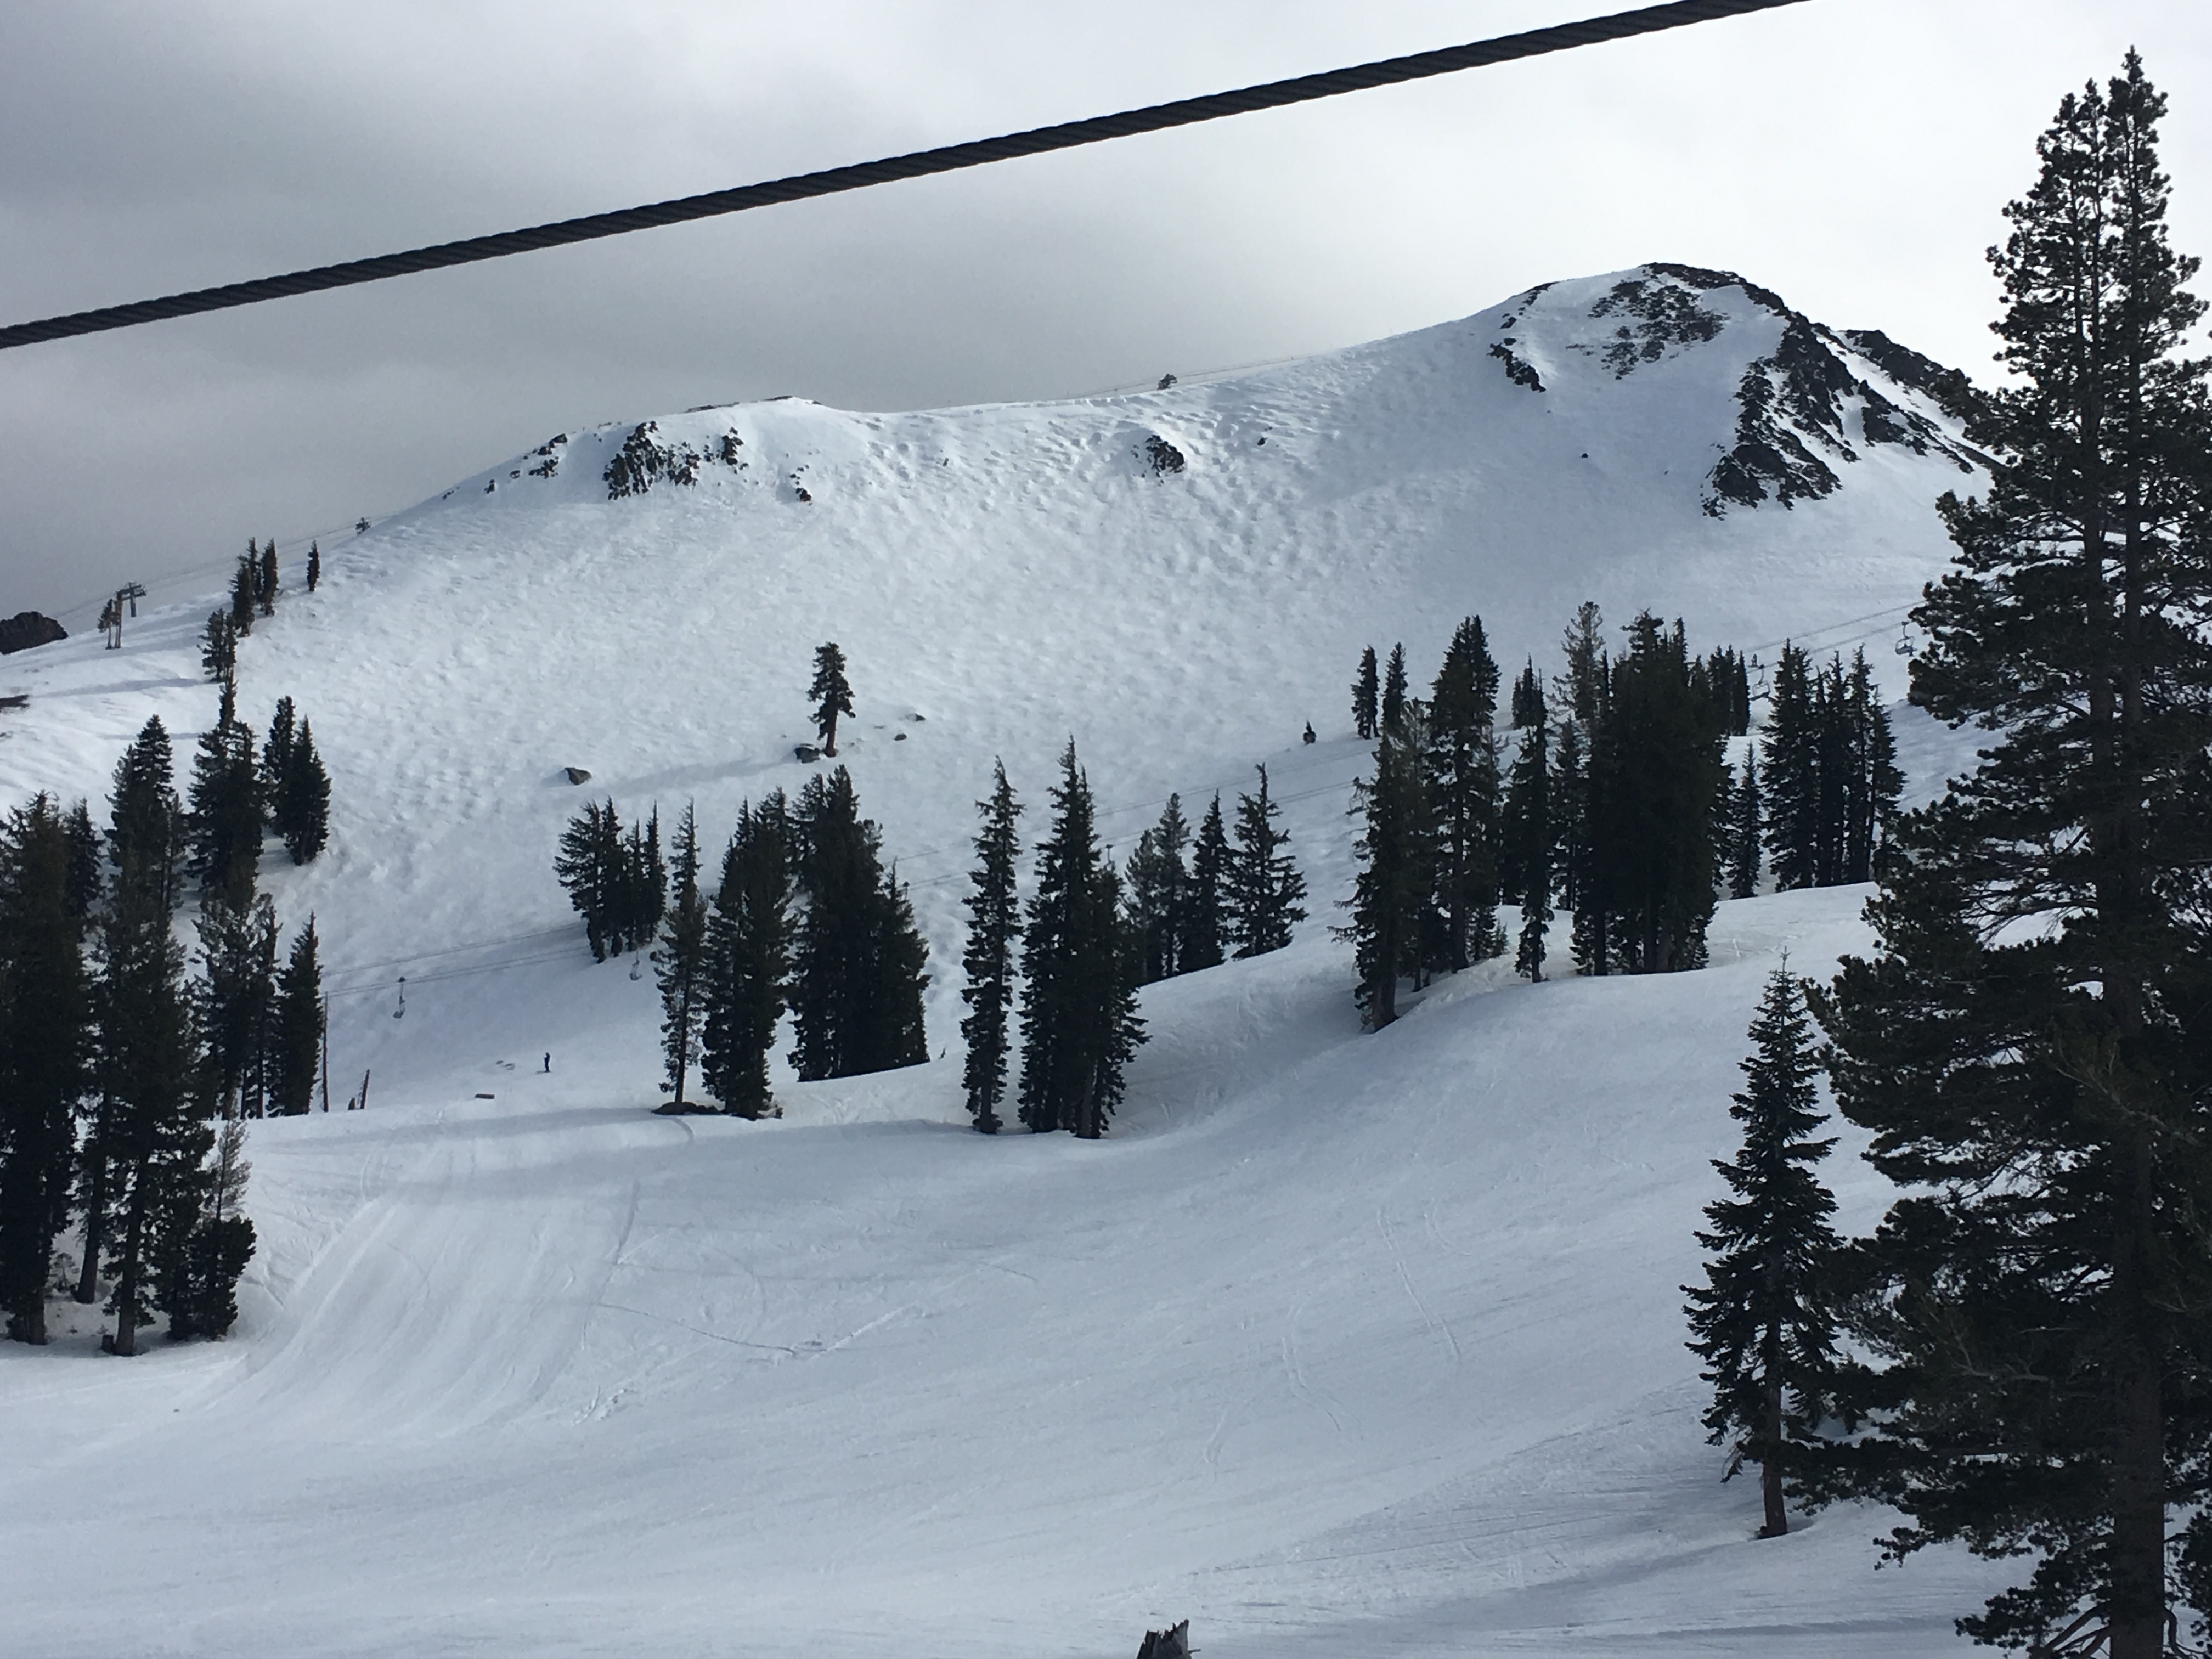 North Bowl today.